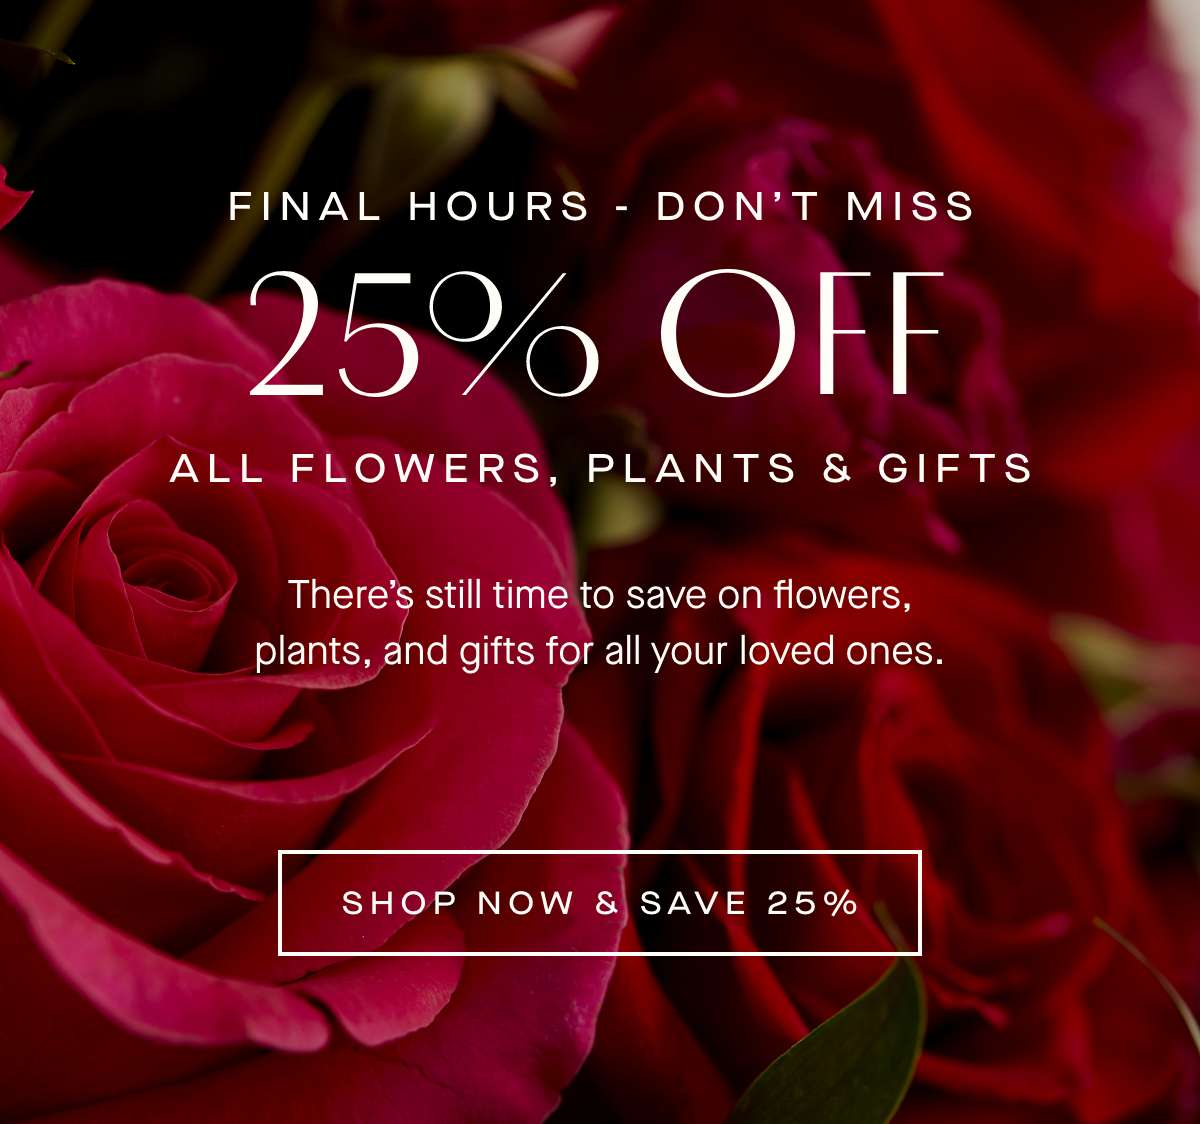 FINAL HOURS - DON'T MISS 25% OFF all flowers, plants & gifts 